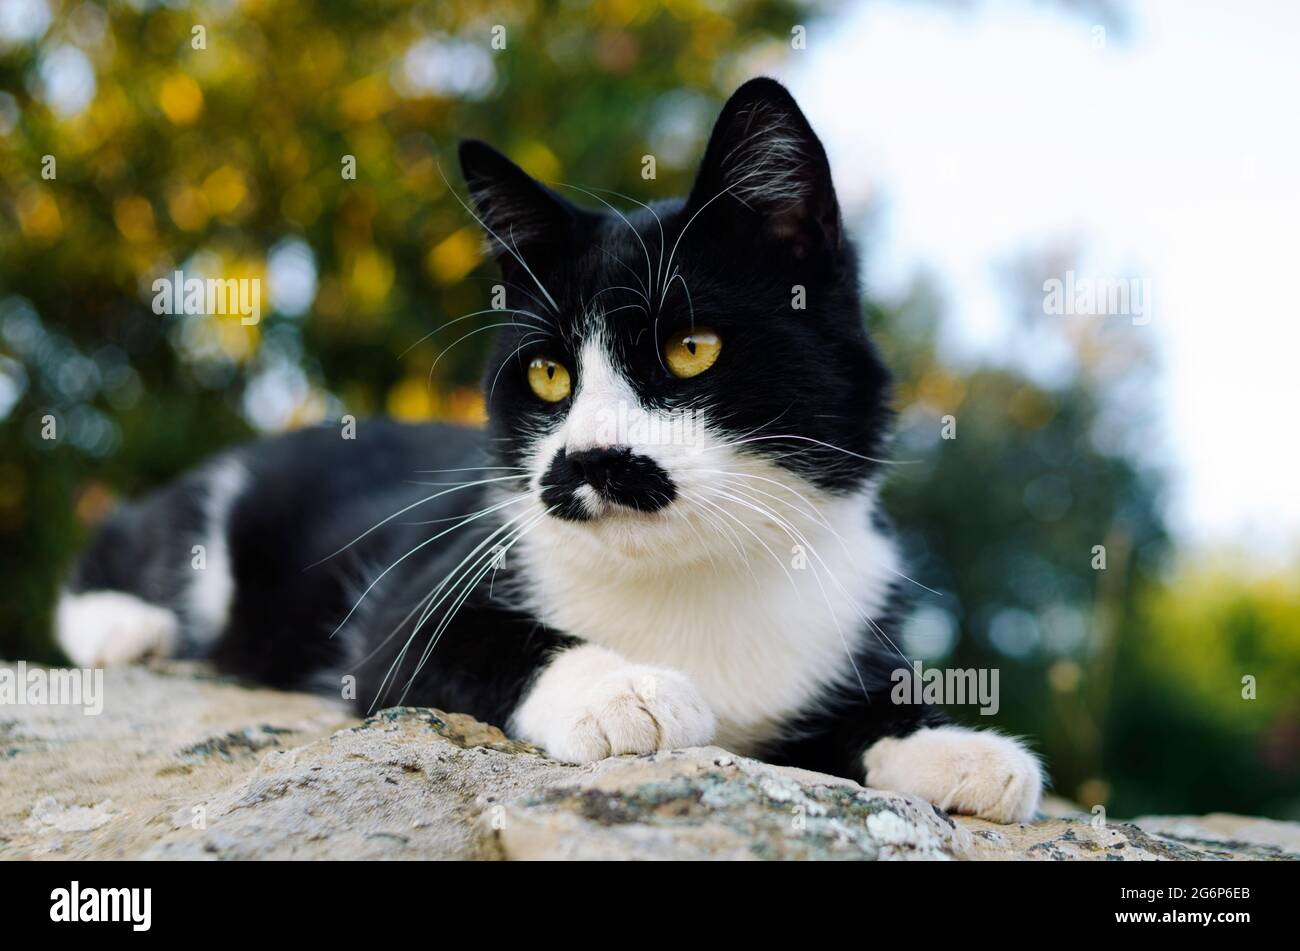 Front view of a lying cat outdoors Stock Photo